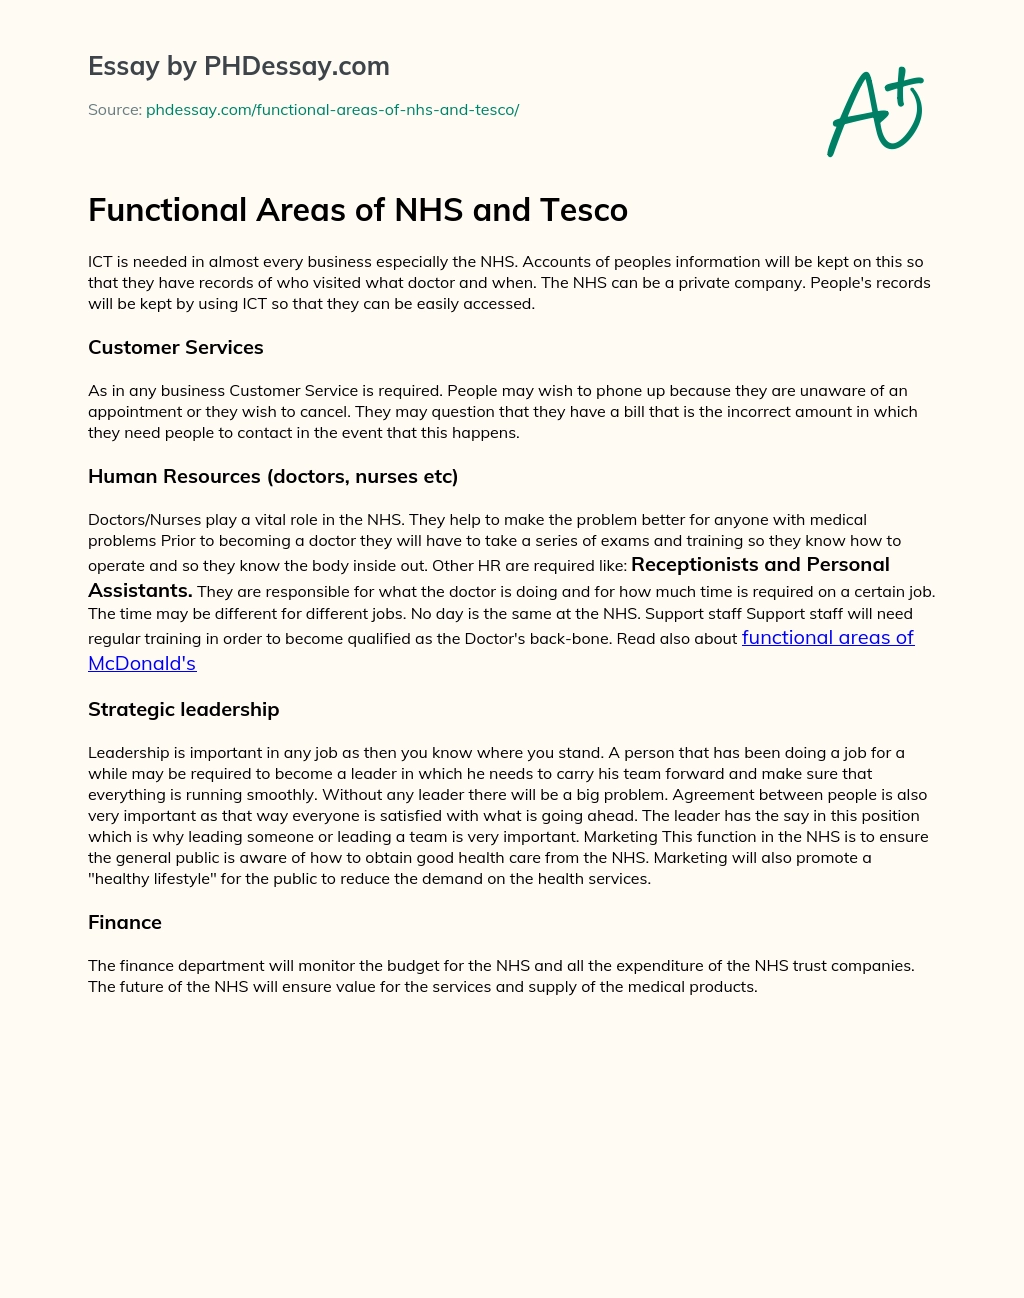 Functional Areas of NHS and Tesco essay